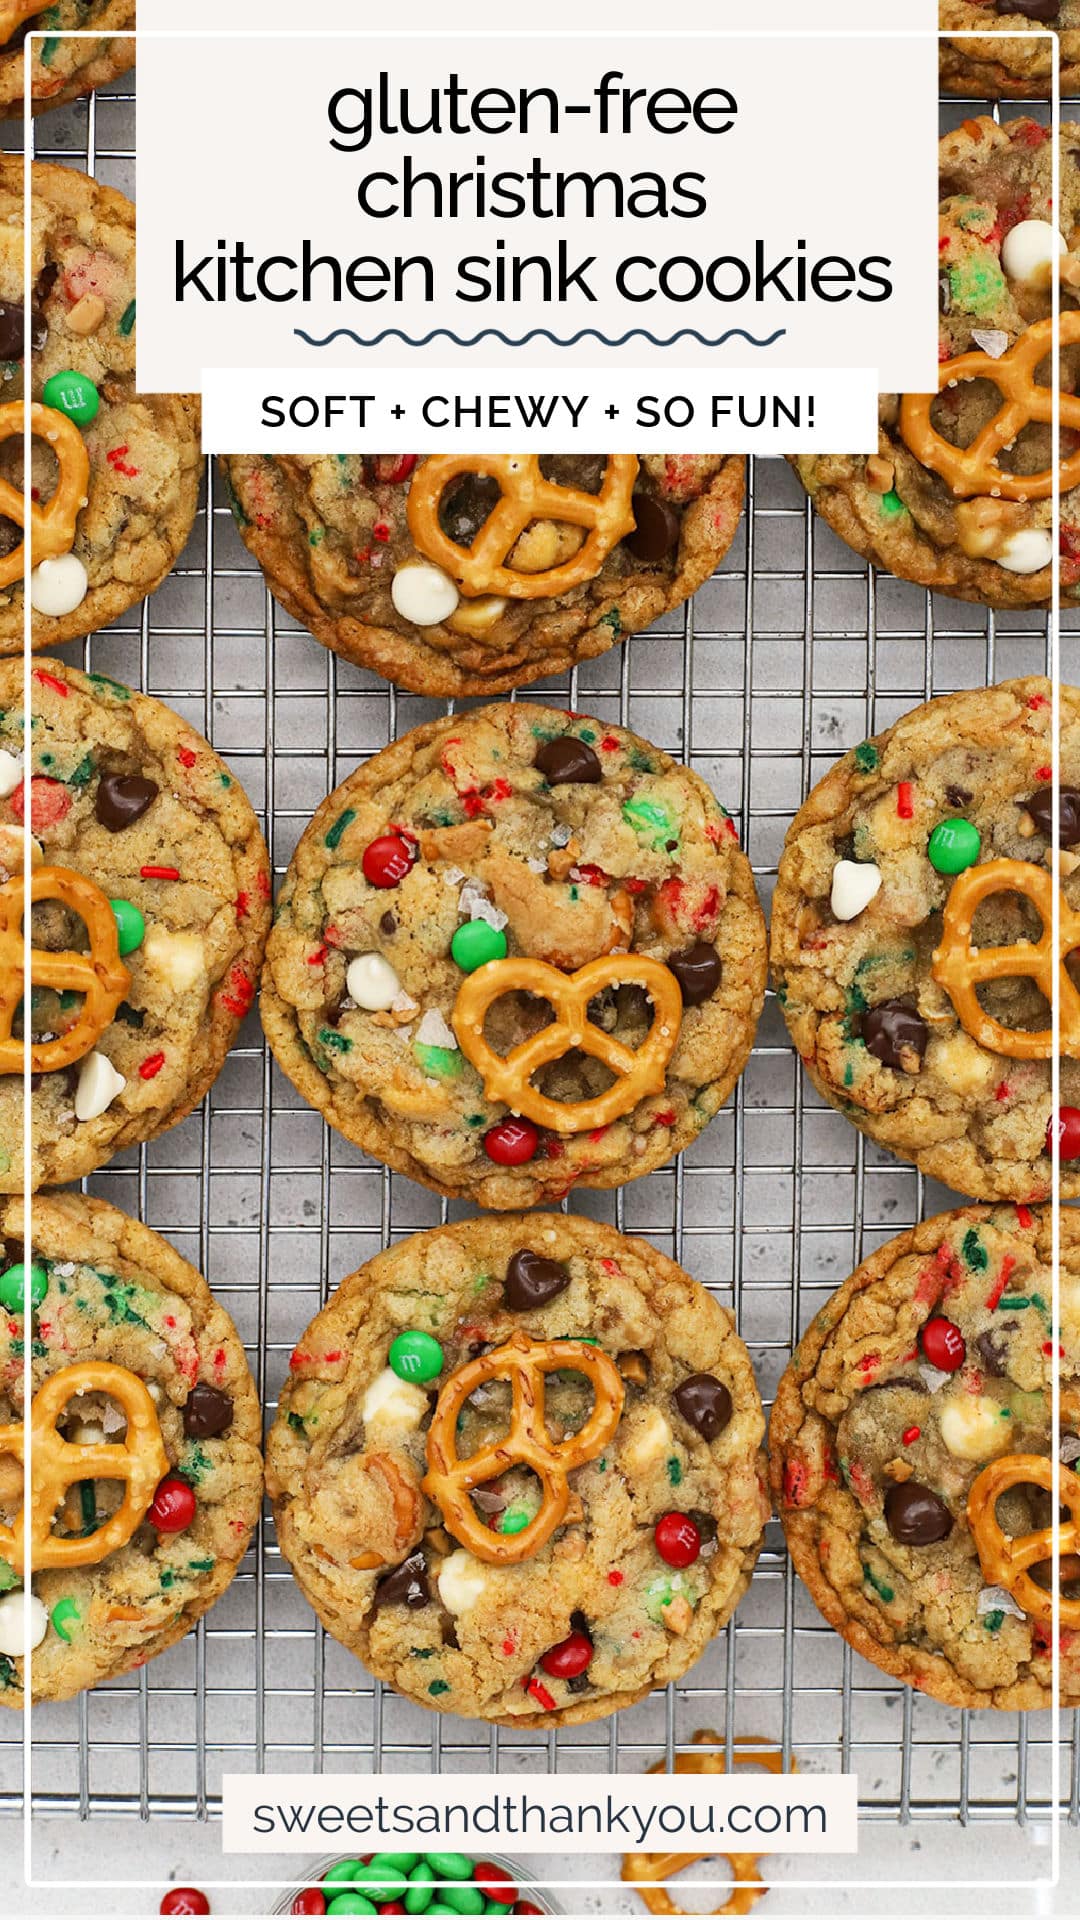 Looking for a fun gluten-free Christmas cookie to try this year? These Gluten-Free Christmas Kitchen Sink Cookies are here to deliver! They're packed with festive color & delicious flavor in every bite. Try them for a gluten-free cookie exchange, gluten-free cookie box, or to give to friends and neighbors. They're the cutest gluten-free holiday cookie recipe around!